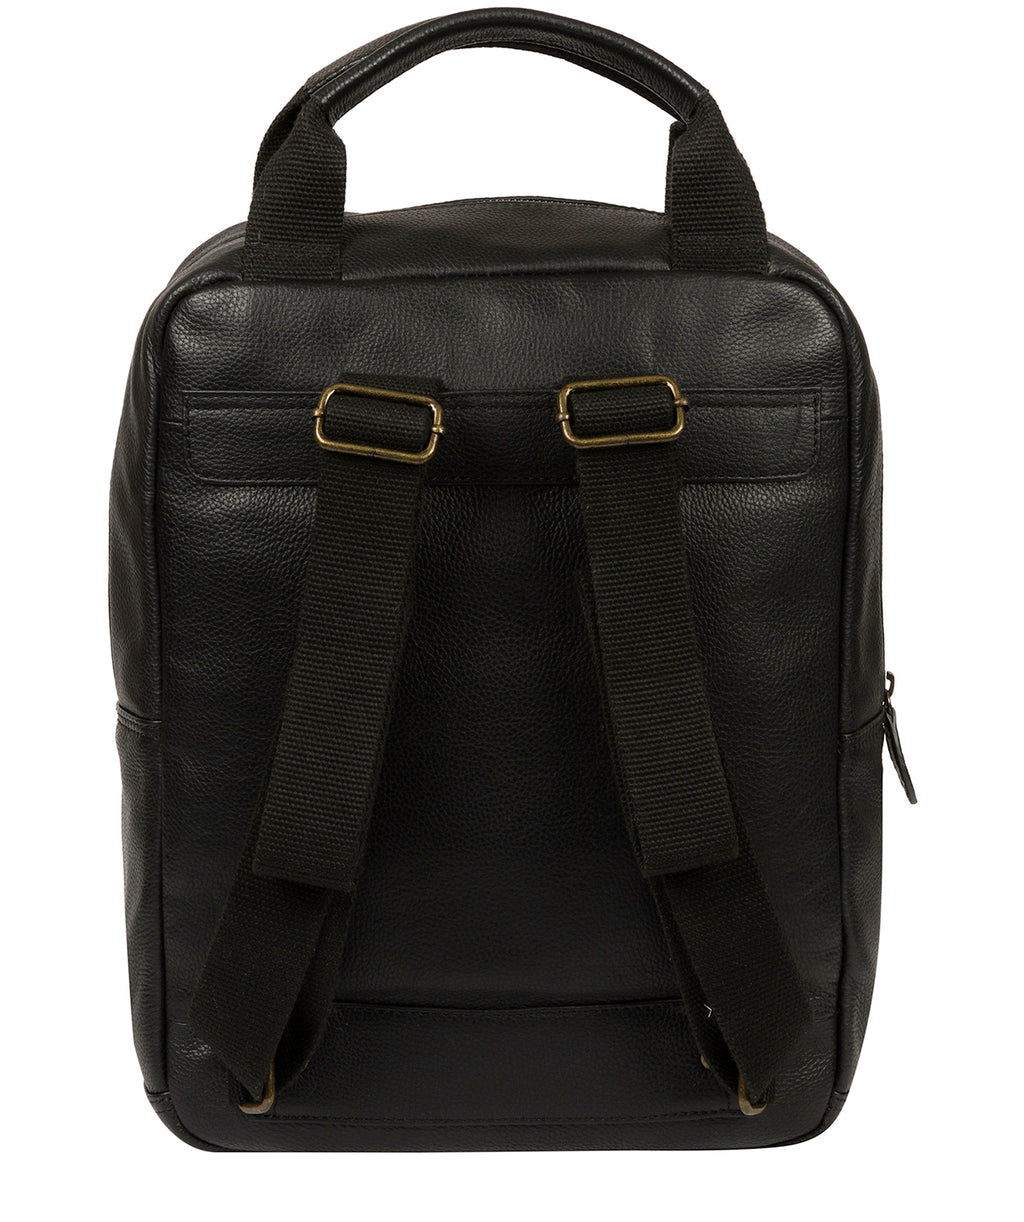 Black Leather Backpack 'Alps' by Cultured London – Pure Luxuries London